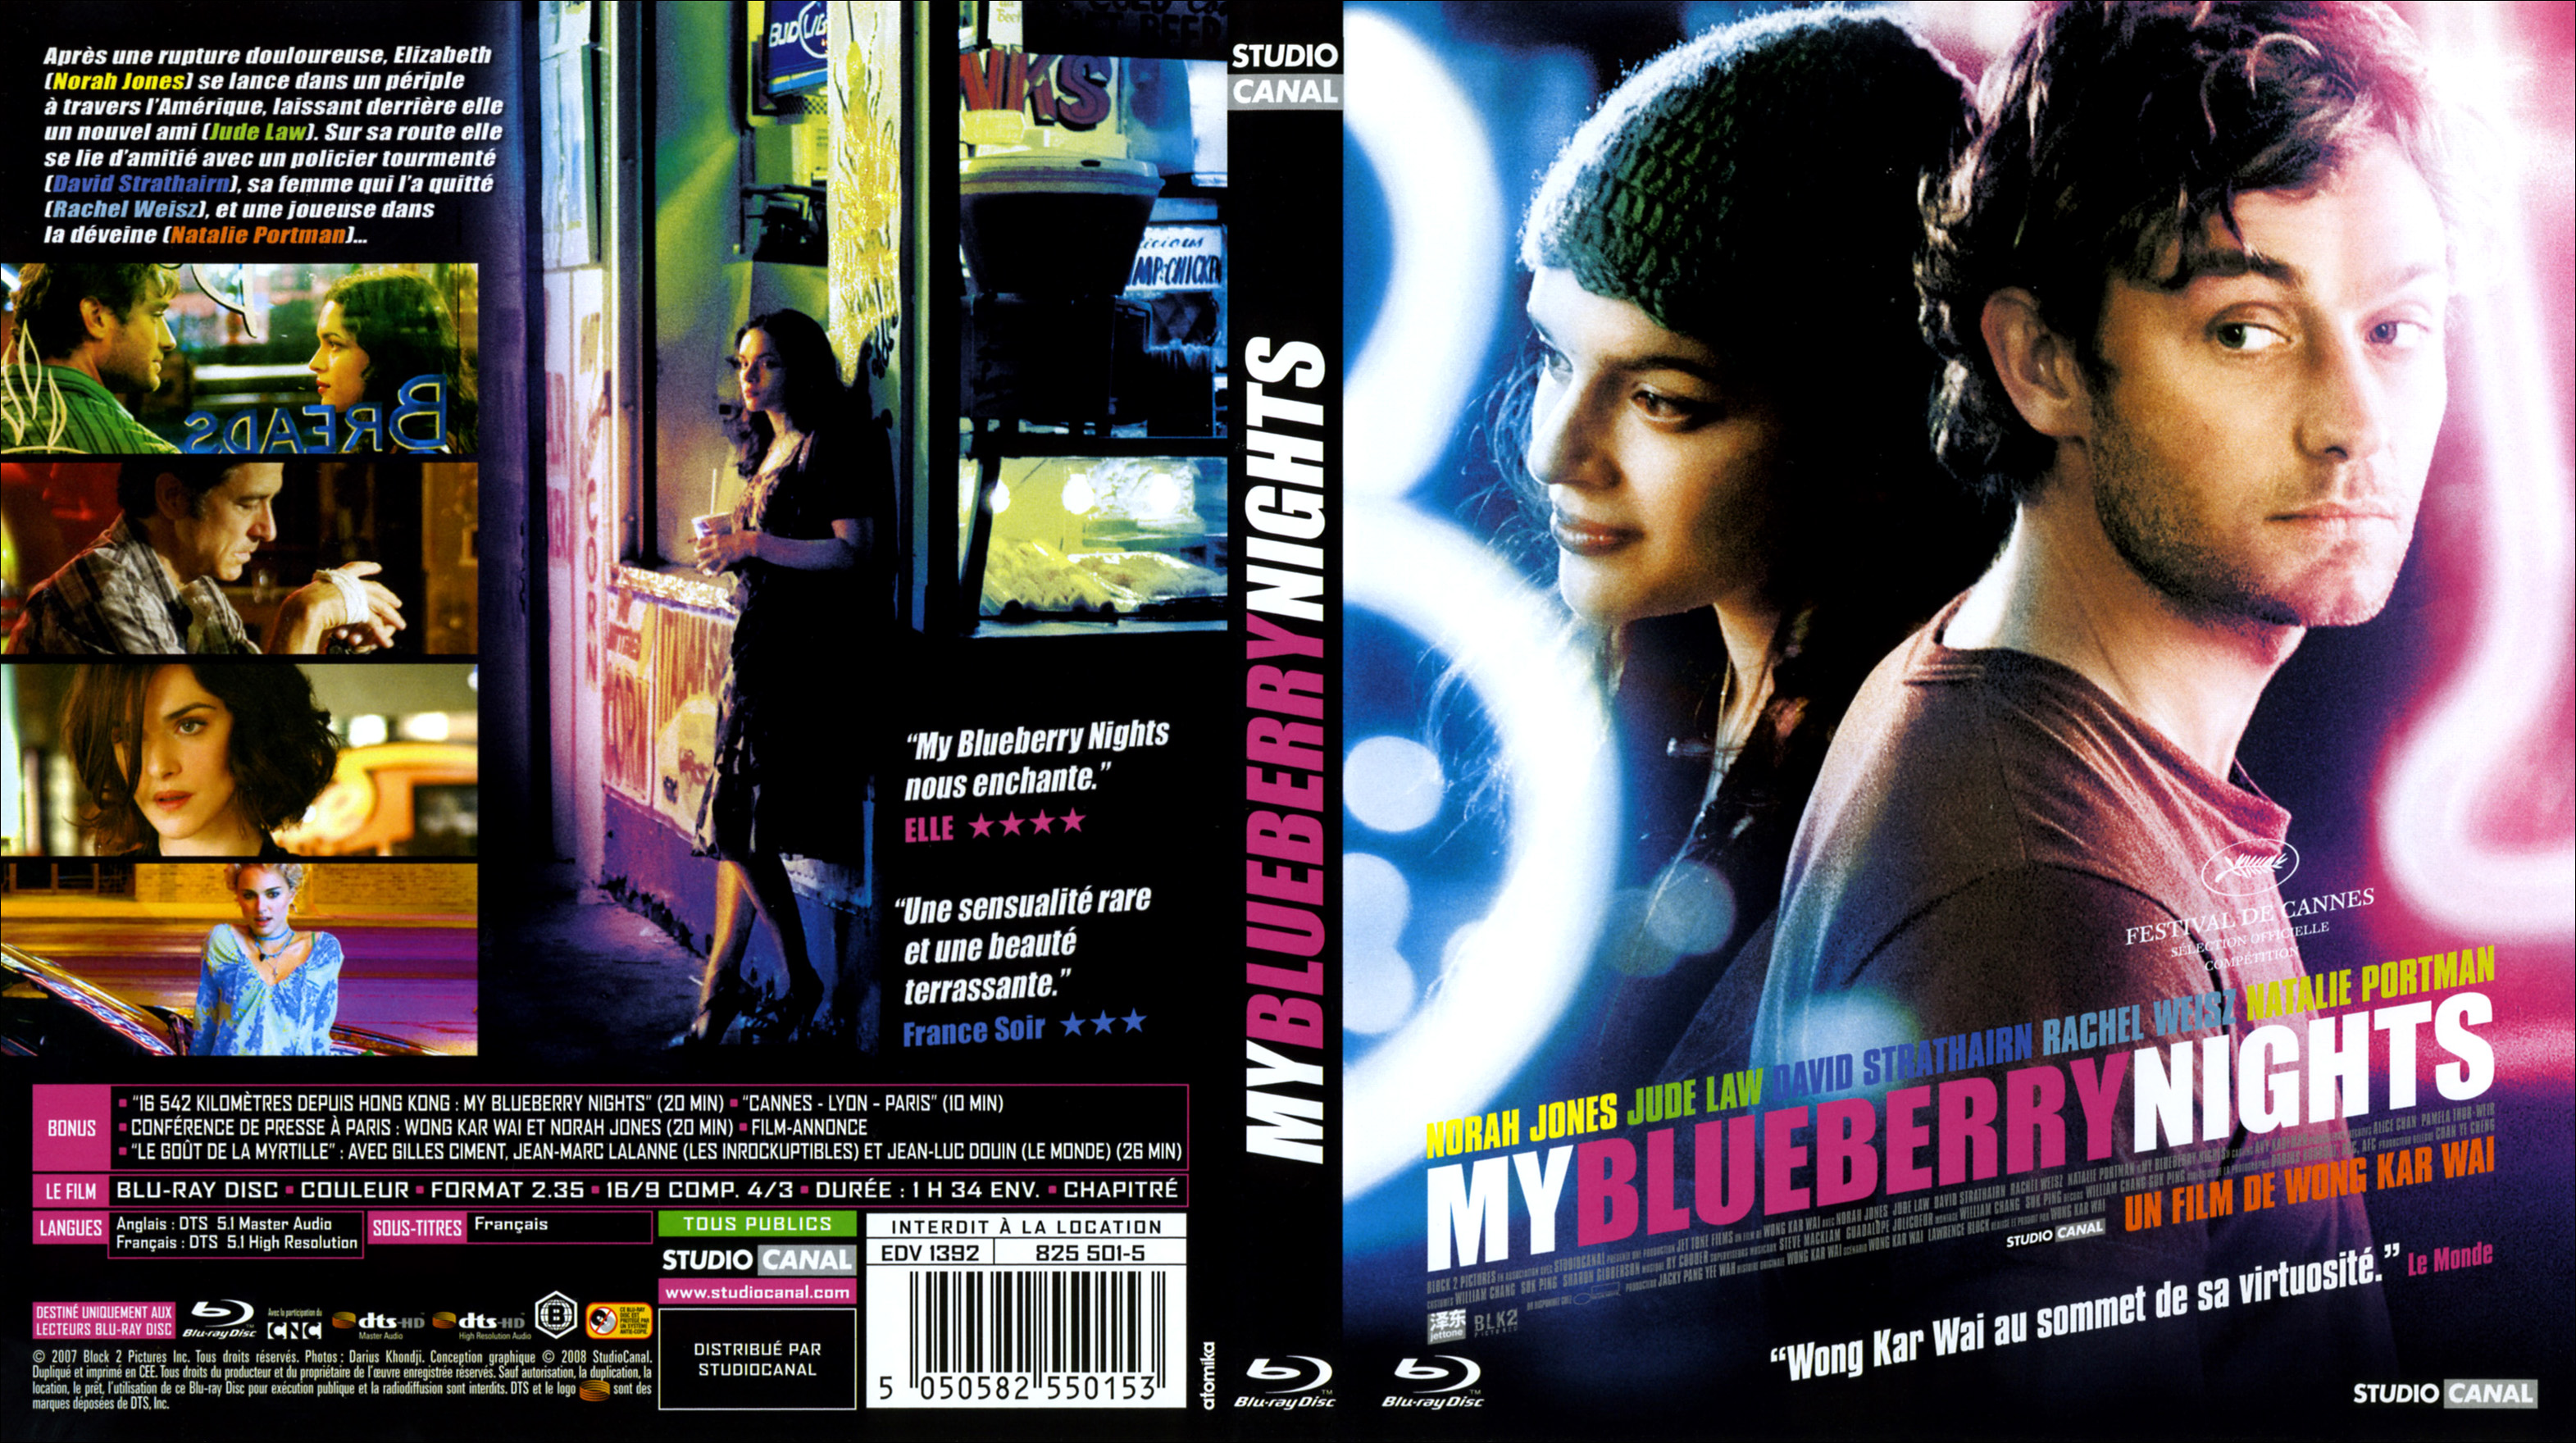 Jaquette DVD My blueberry nights (BLU-RAY)